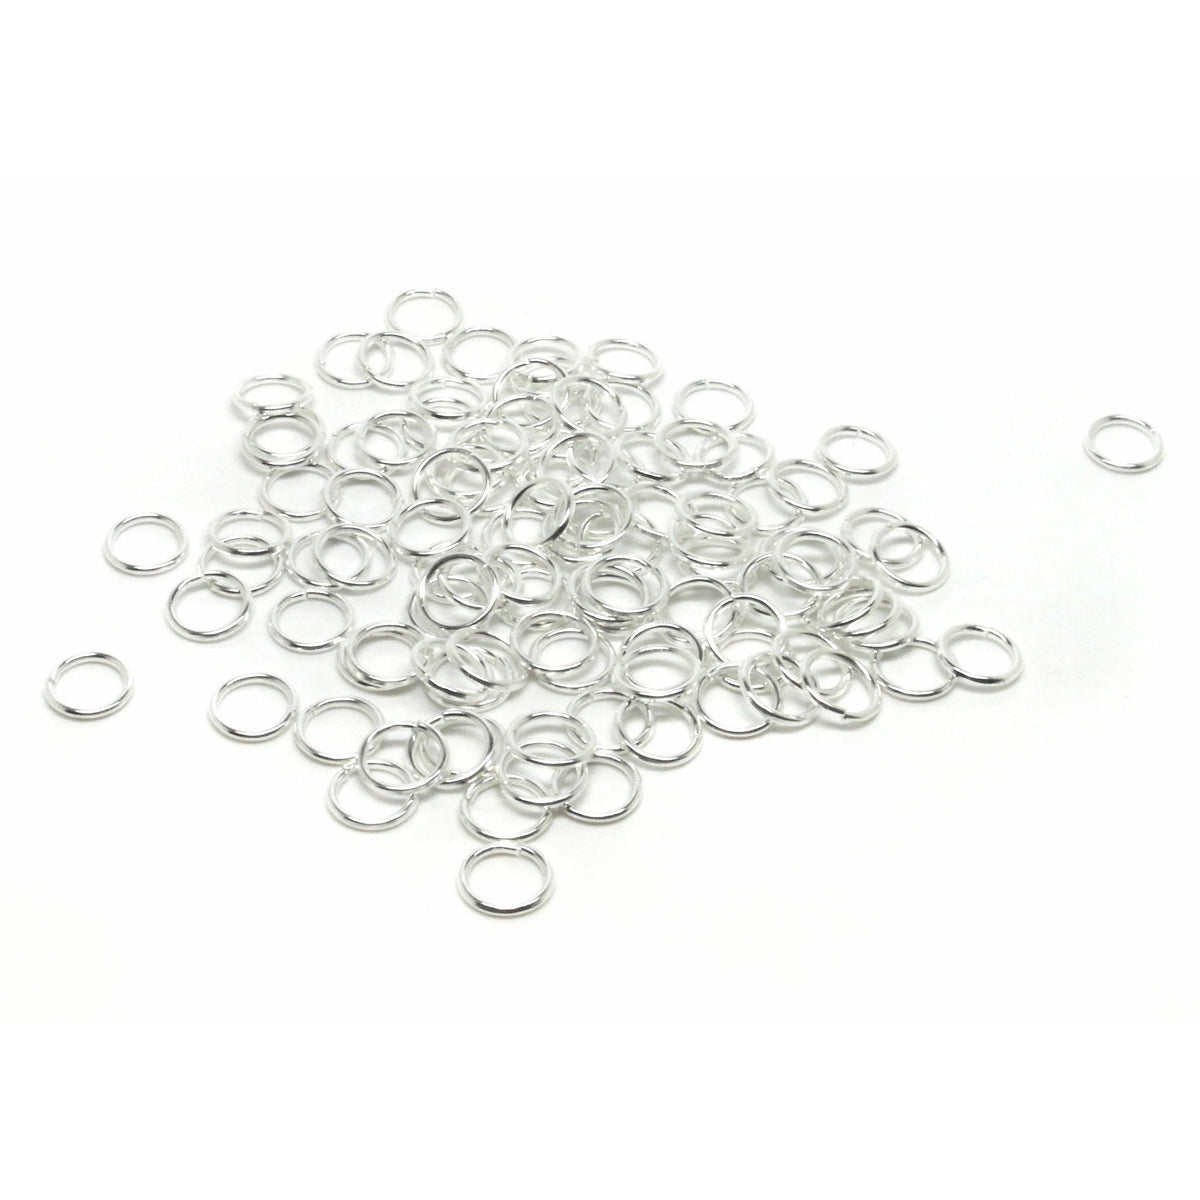 EXTRA LARGE SILVER PLATED JUMP RINGS 12mm 14mm 16mm 18mm 20mm 22mm UK  SELLER